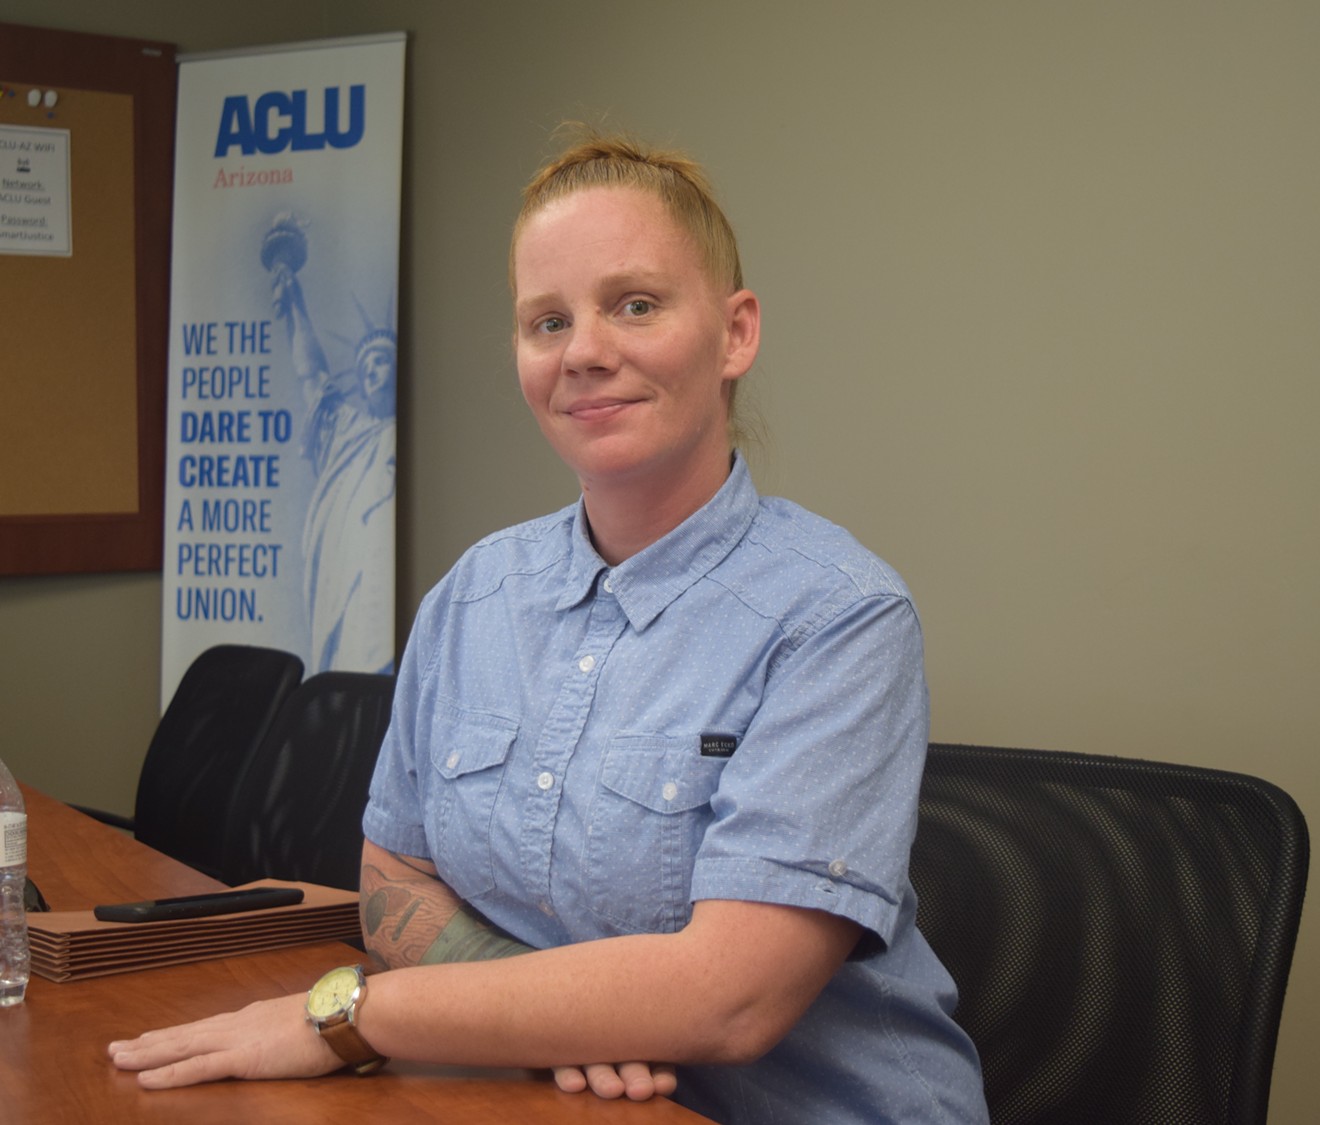 The ACLU has filed a complaint against Chili's with the Equal Employment Opportunity Commission on behalf of Meagan Hunter, 35, who claims management at the company held her back because of the way she dressed.